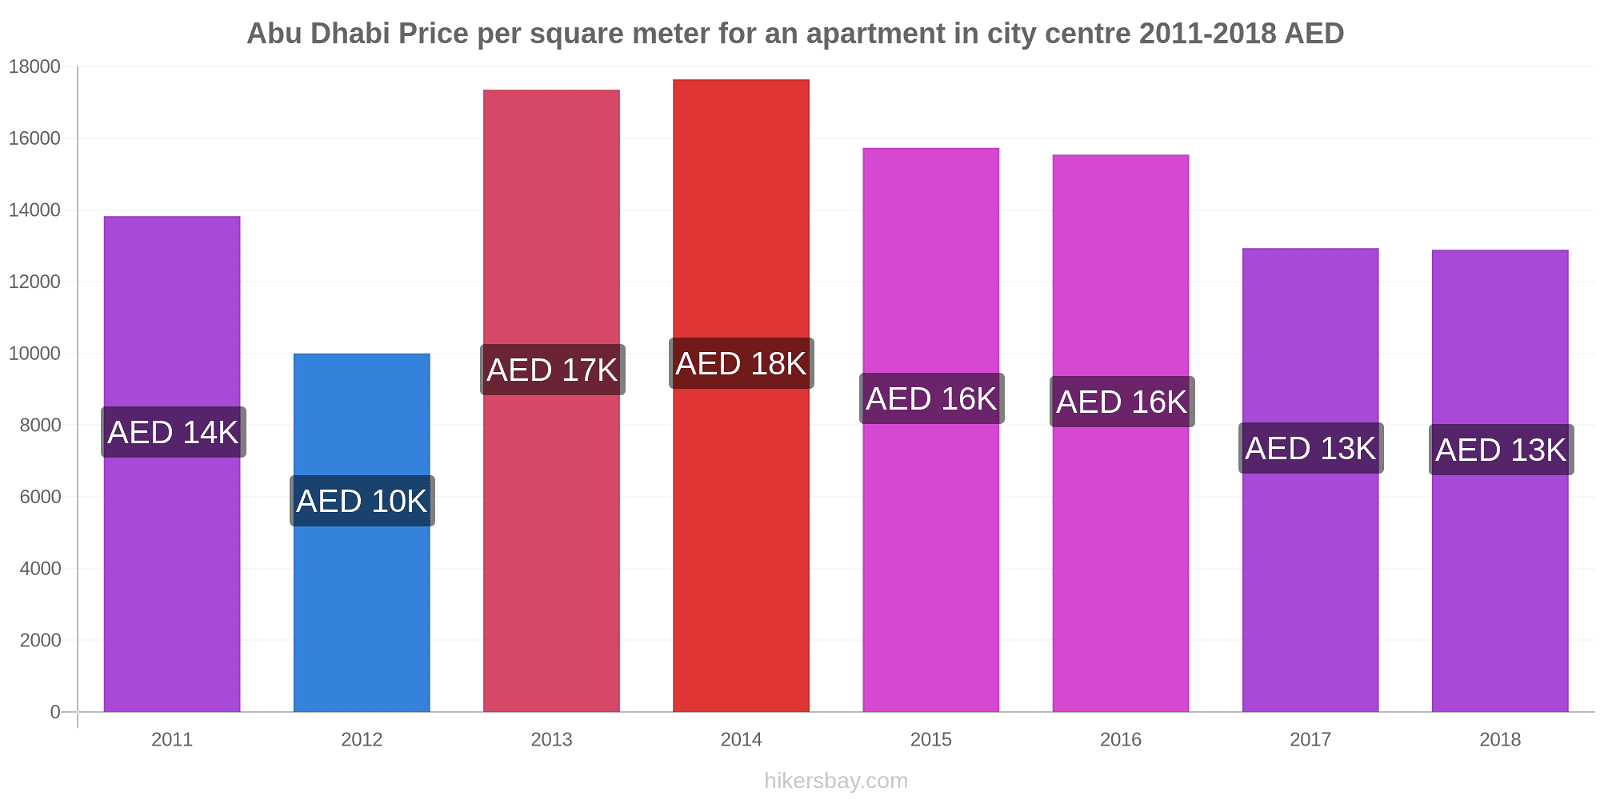 Abu Dhabi price changes Price per square meter for an apartment in city centre hikersbay.com